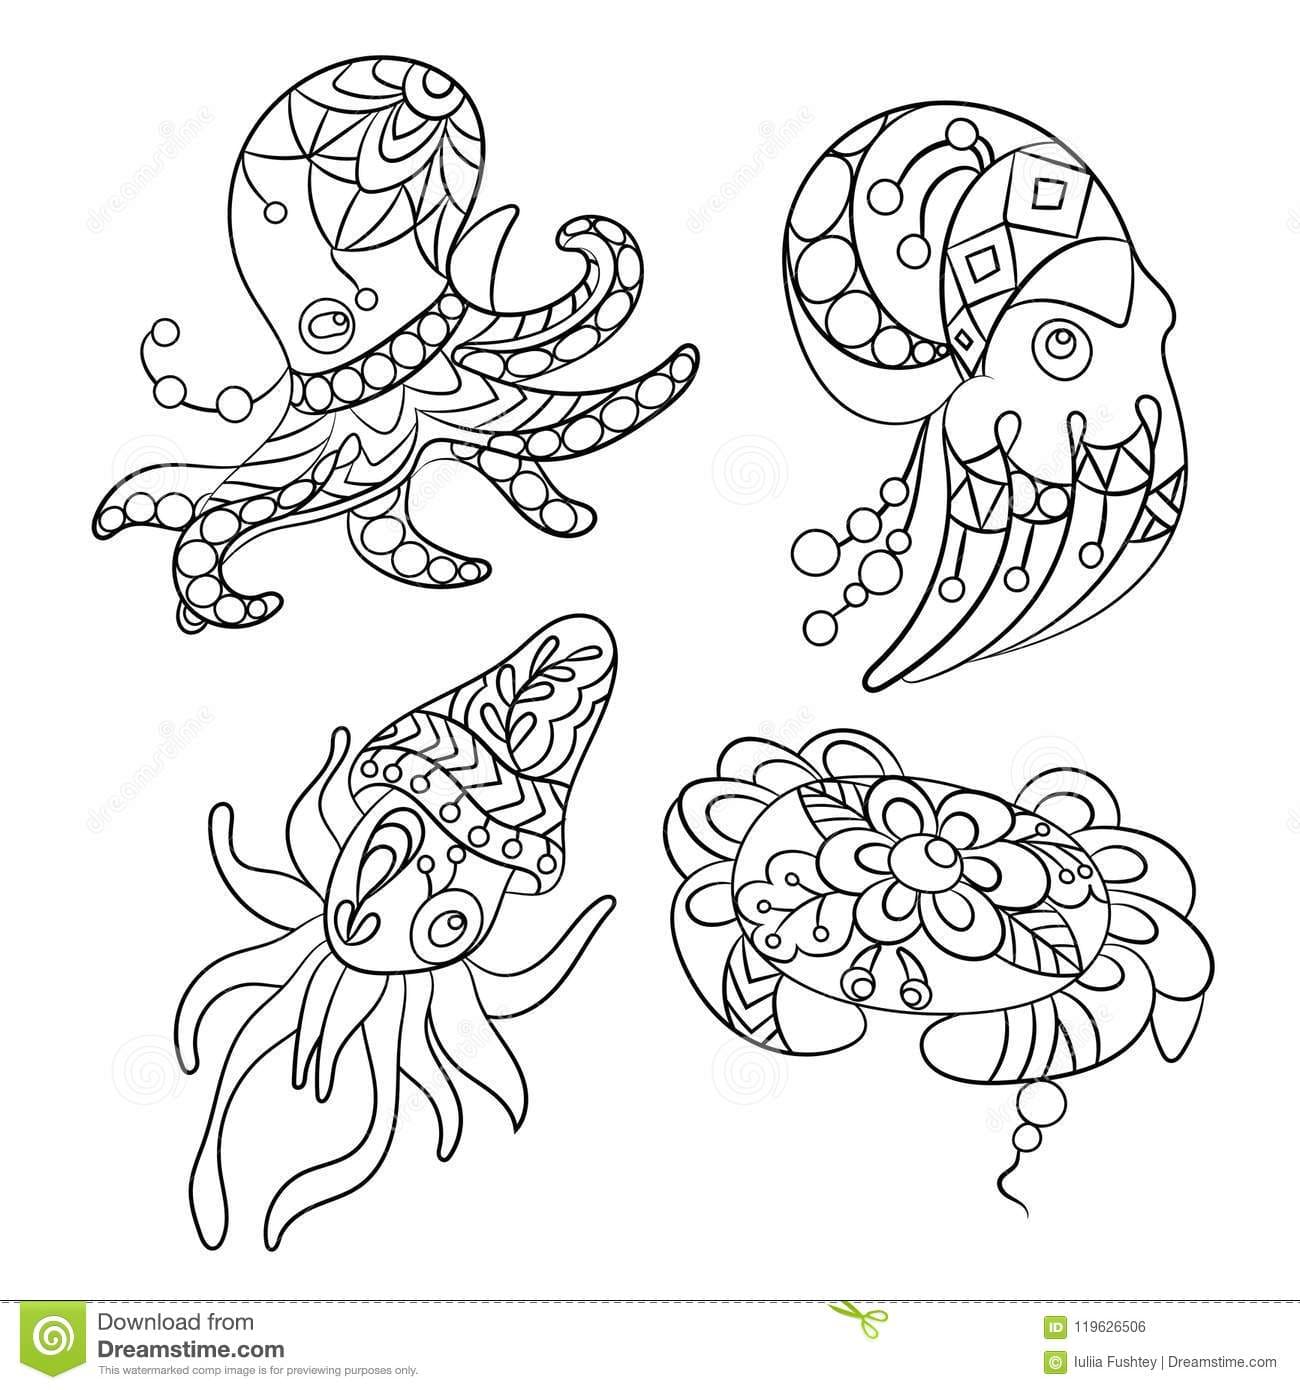 Cute Vampire Squid Free Coloring Page